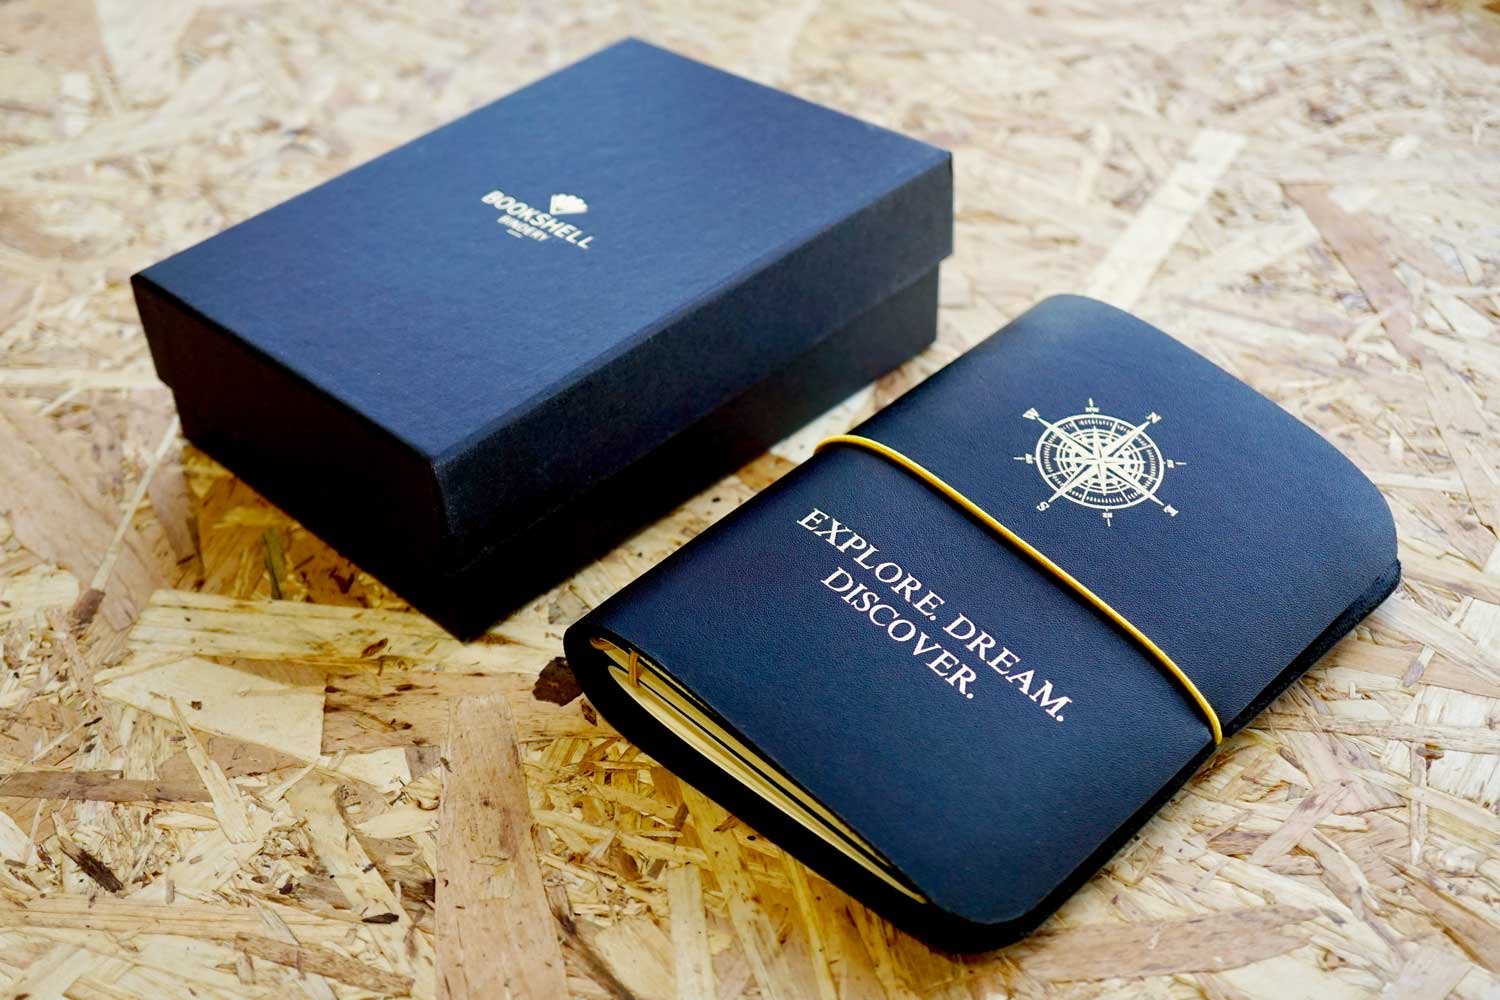 Never-ending journal, Explore. Dream. Discover; A6 leather travel journal with gold foiled compass on the cover